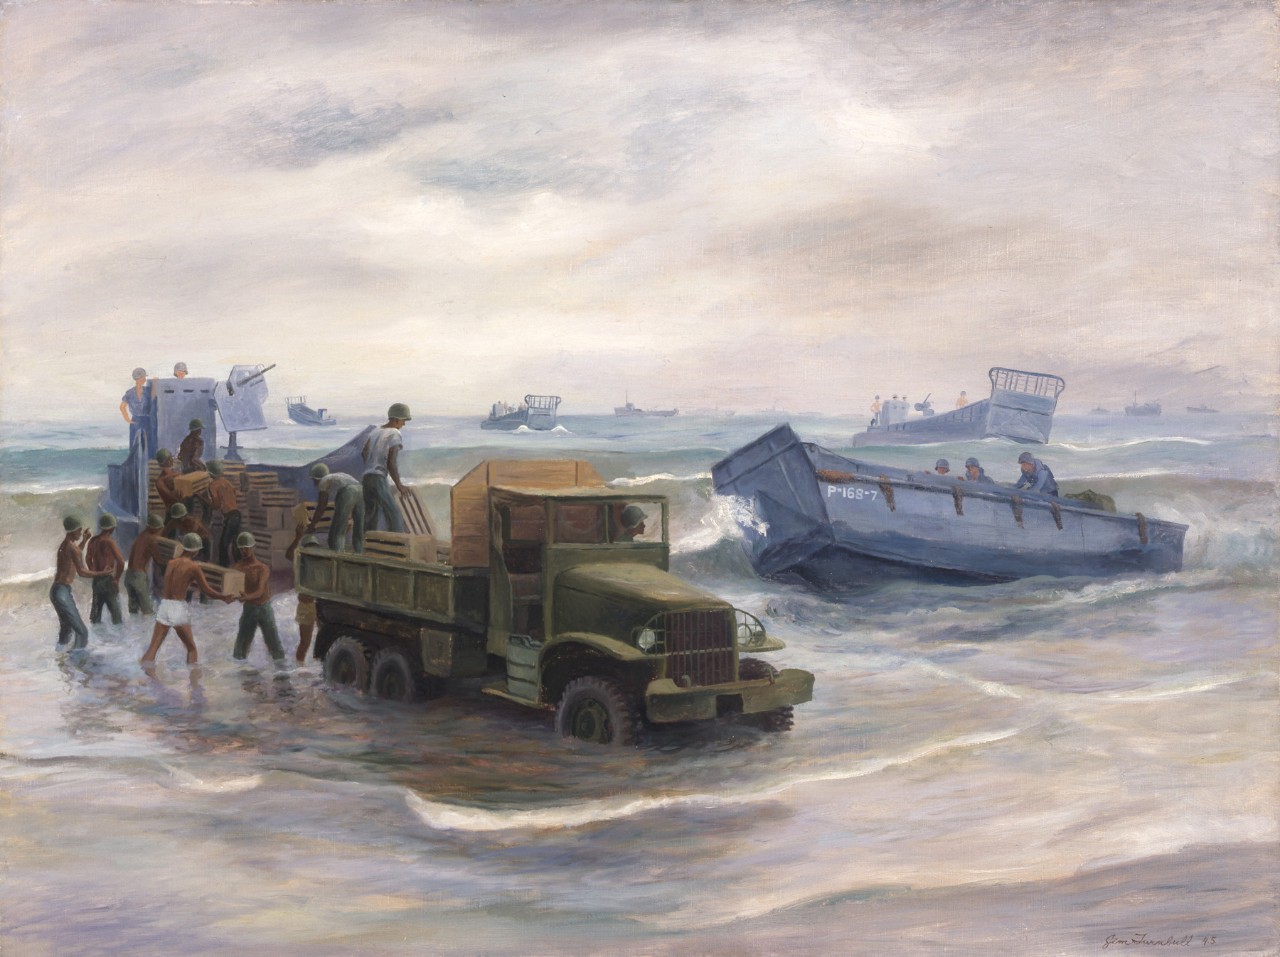 Supplies are unload from a landing craft